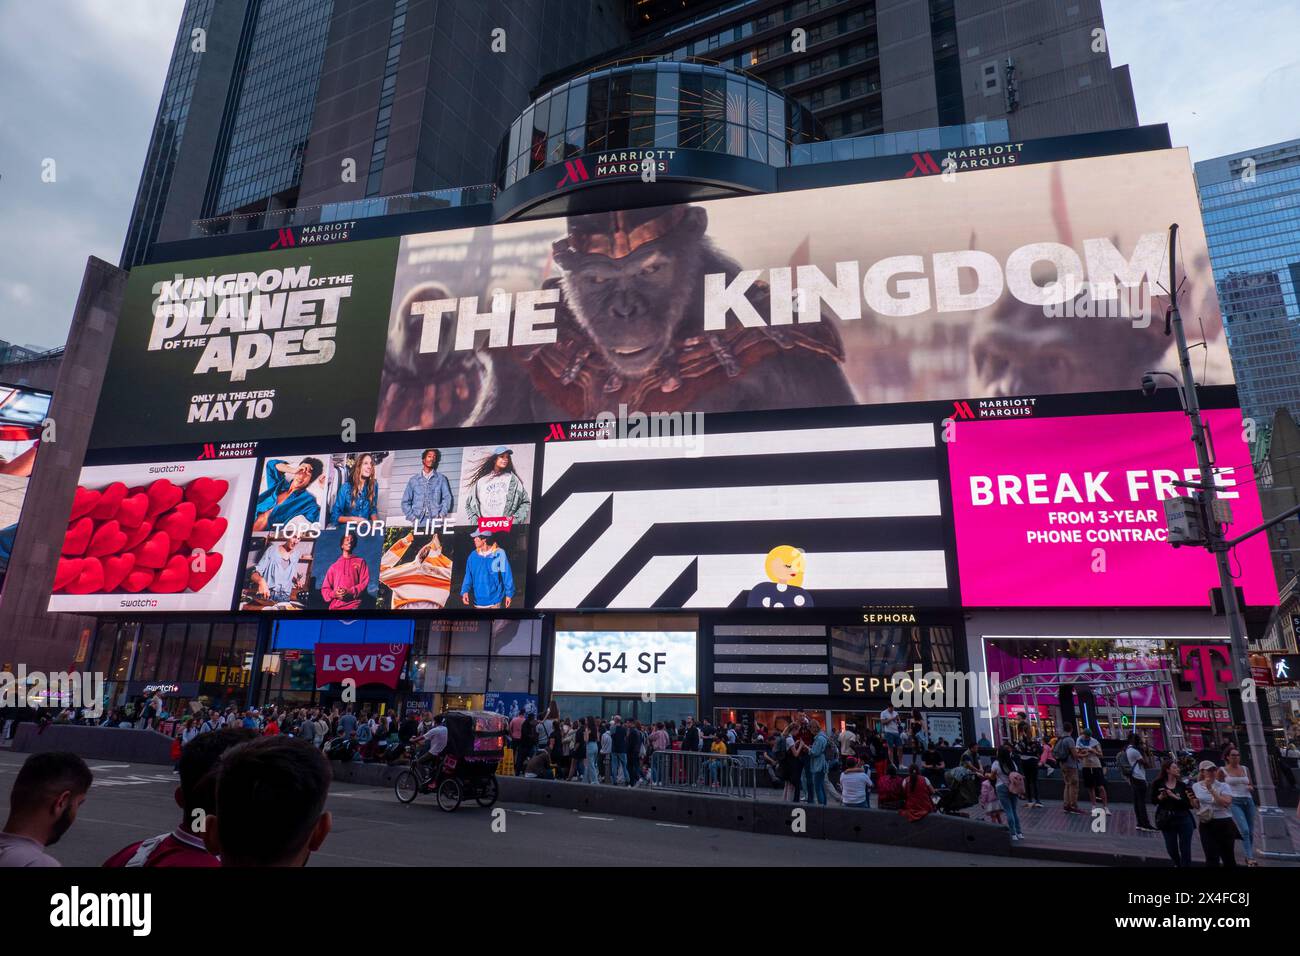 advertisement for Planet of the Apes release date, Times Square, Manhattan, Broadway, at dusk, New York city, USA Stock Photo